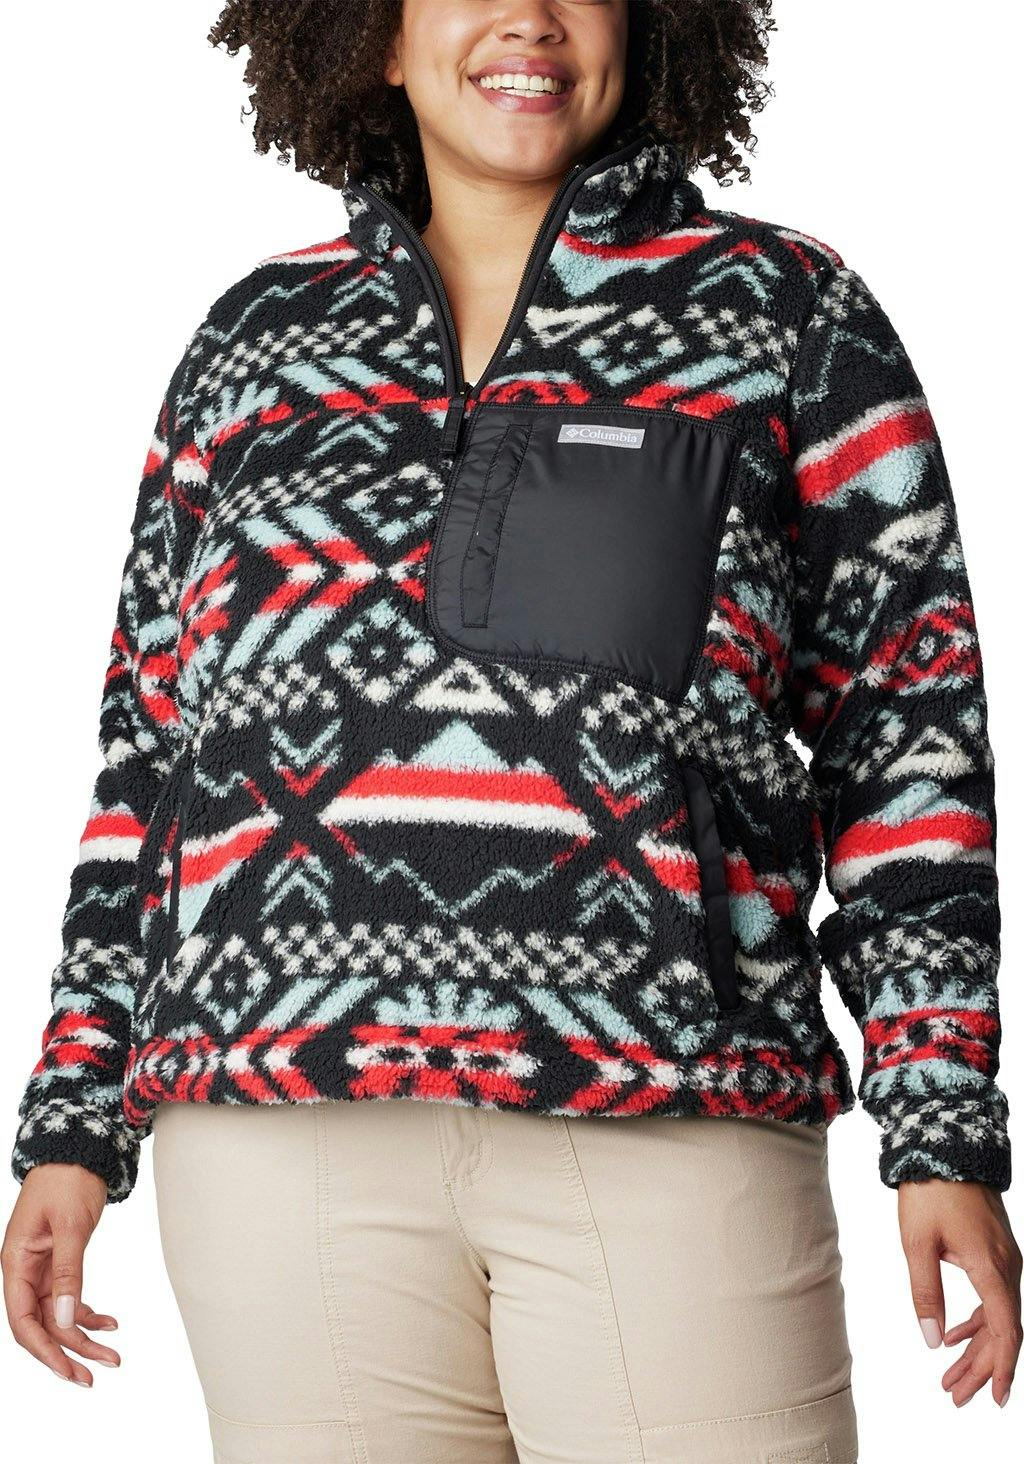 Product image for West Bend 1/4 Zip Pullover Sweater - Women's